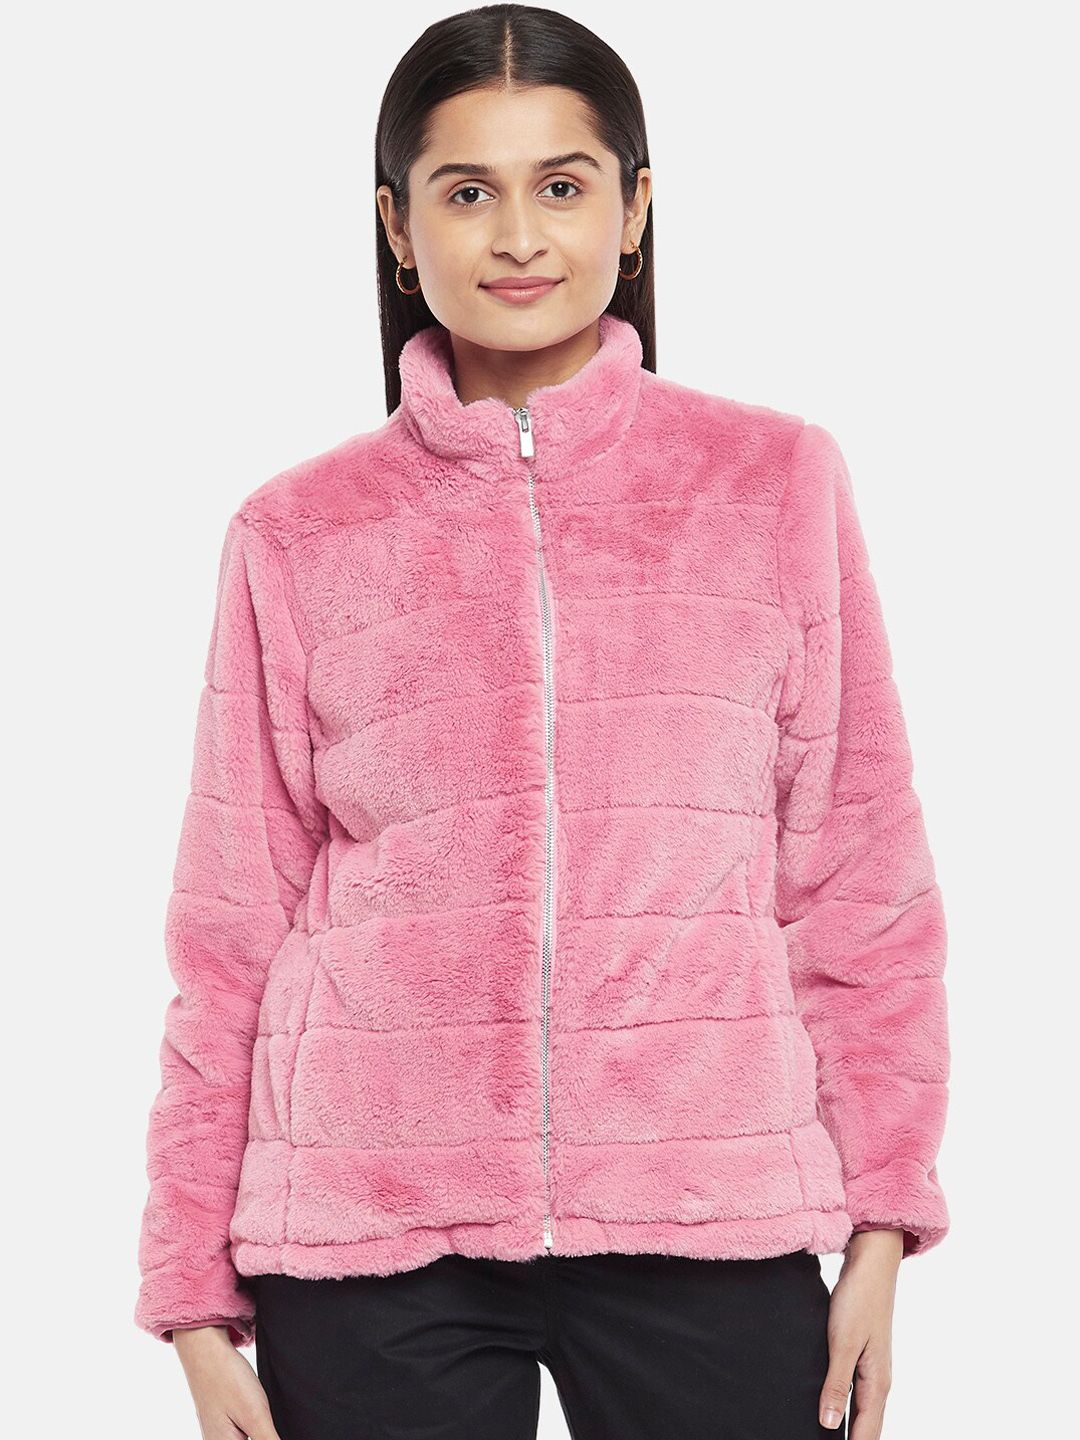 Honey by Pantaloons Women Pink Quilted Jacket Price in India